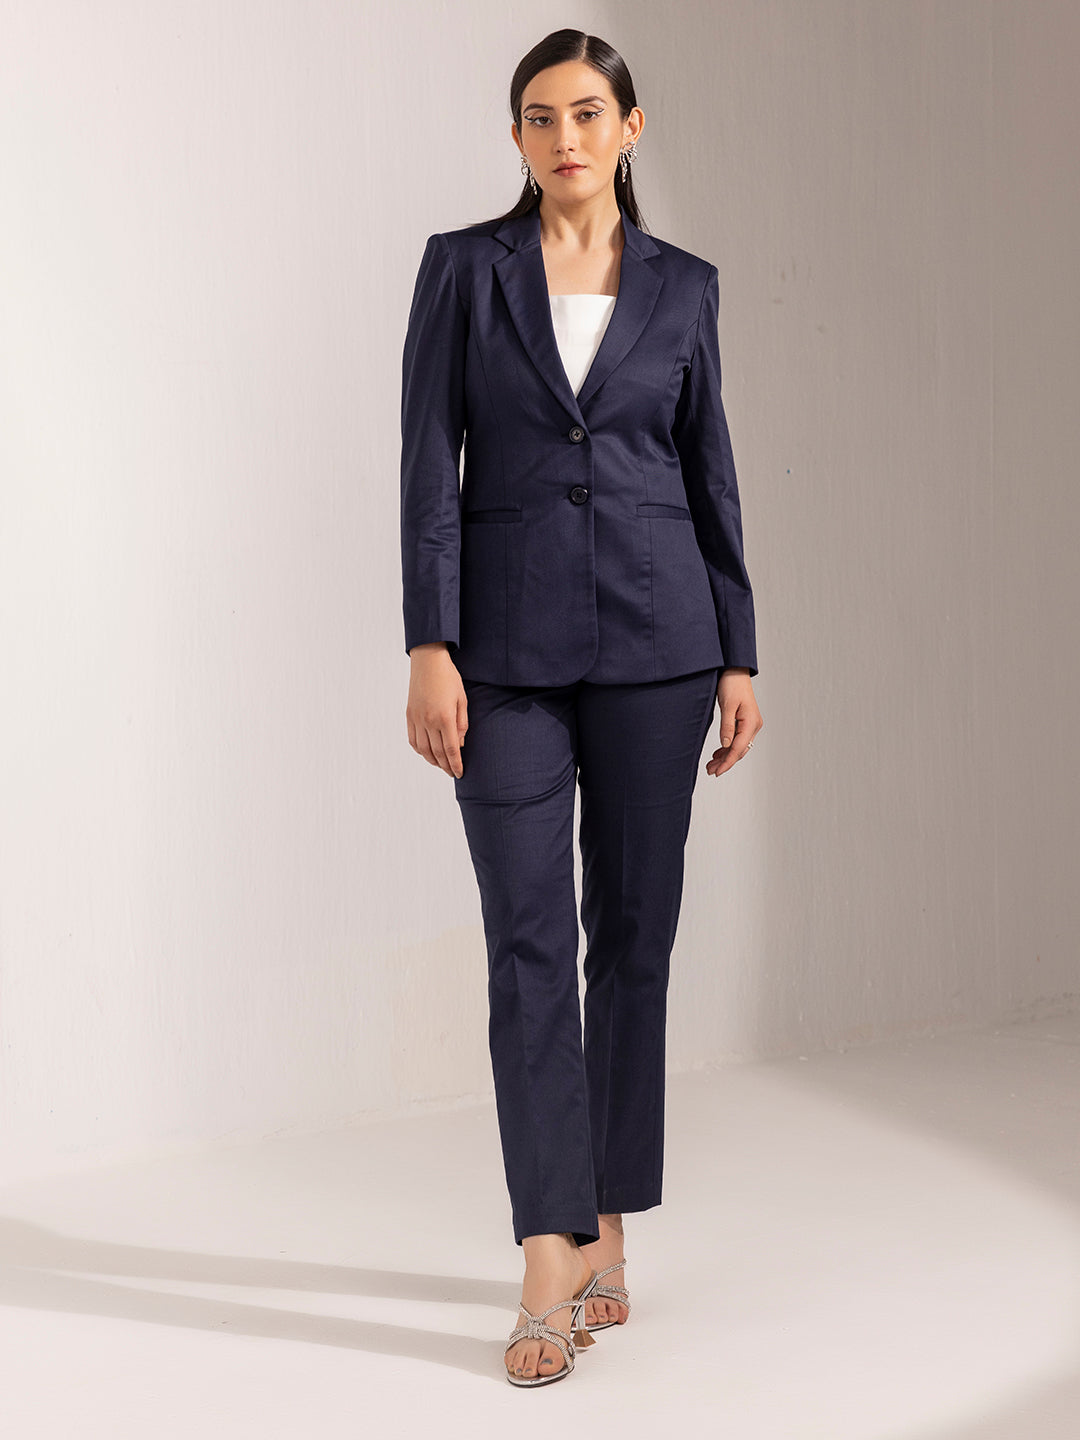 Womens Suits & Blazers Wjustforu Casual Office Suit Womens Space Layer  Ruffle Tops + Pencil Pants Bodycon Formal Business Women Woman Set From  Bida Amy, $36.1